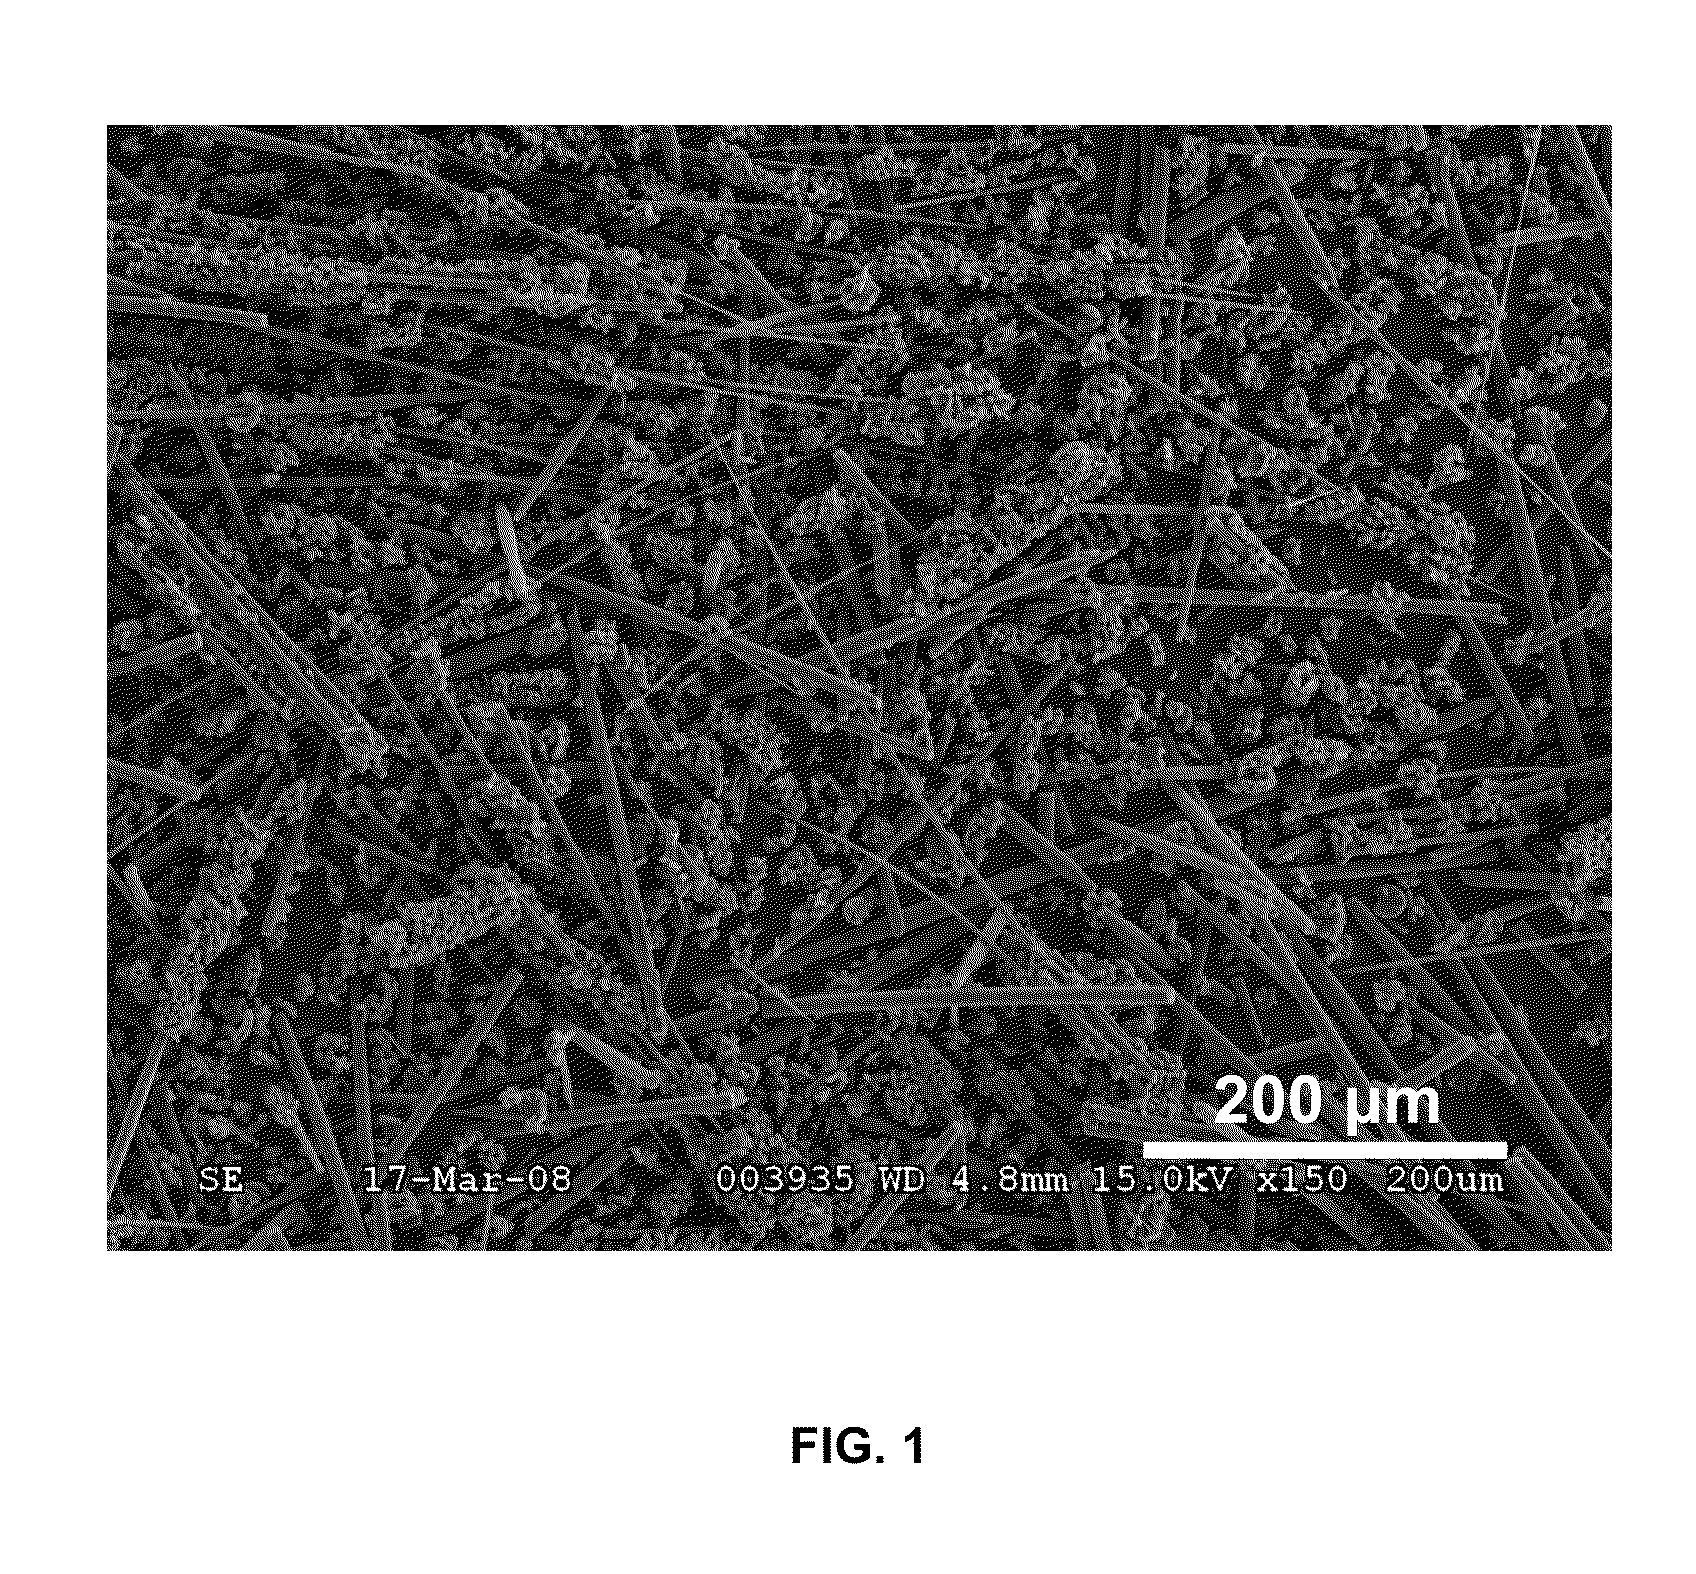 Fibrous substrate-based hydroprocessing catalysts and associated methods